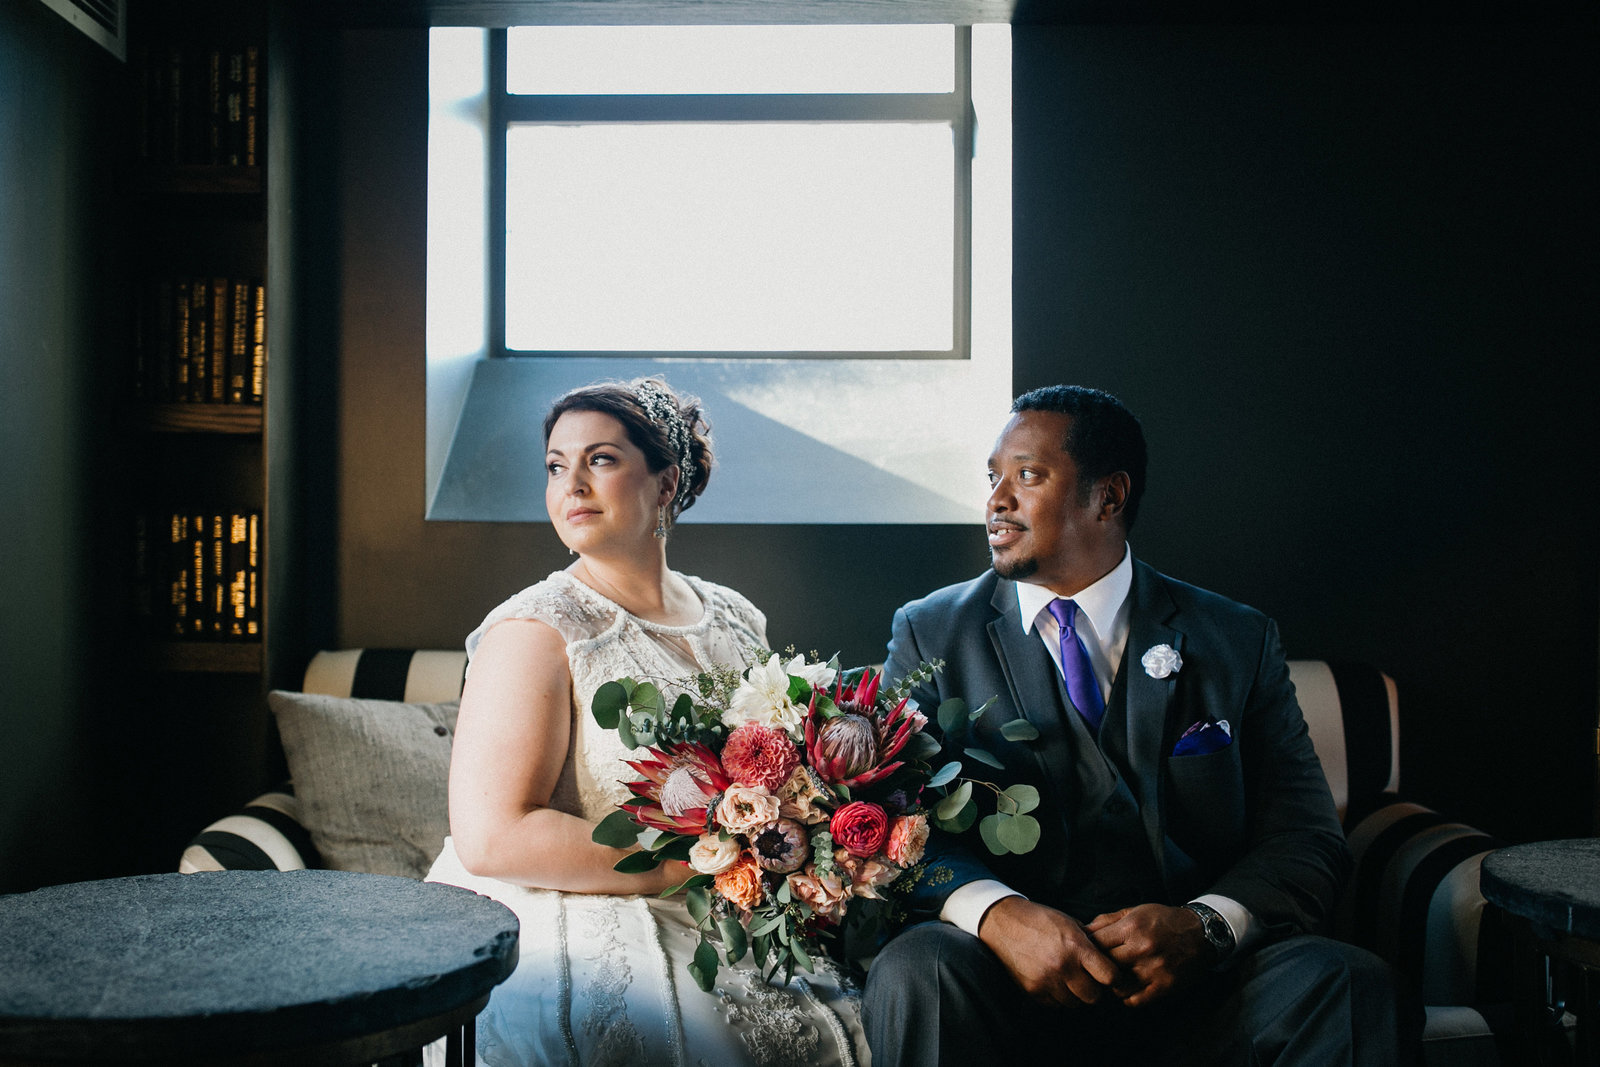 Newly wed couple photographed at Philadelphia's Stratus Lounge.